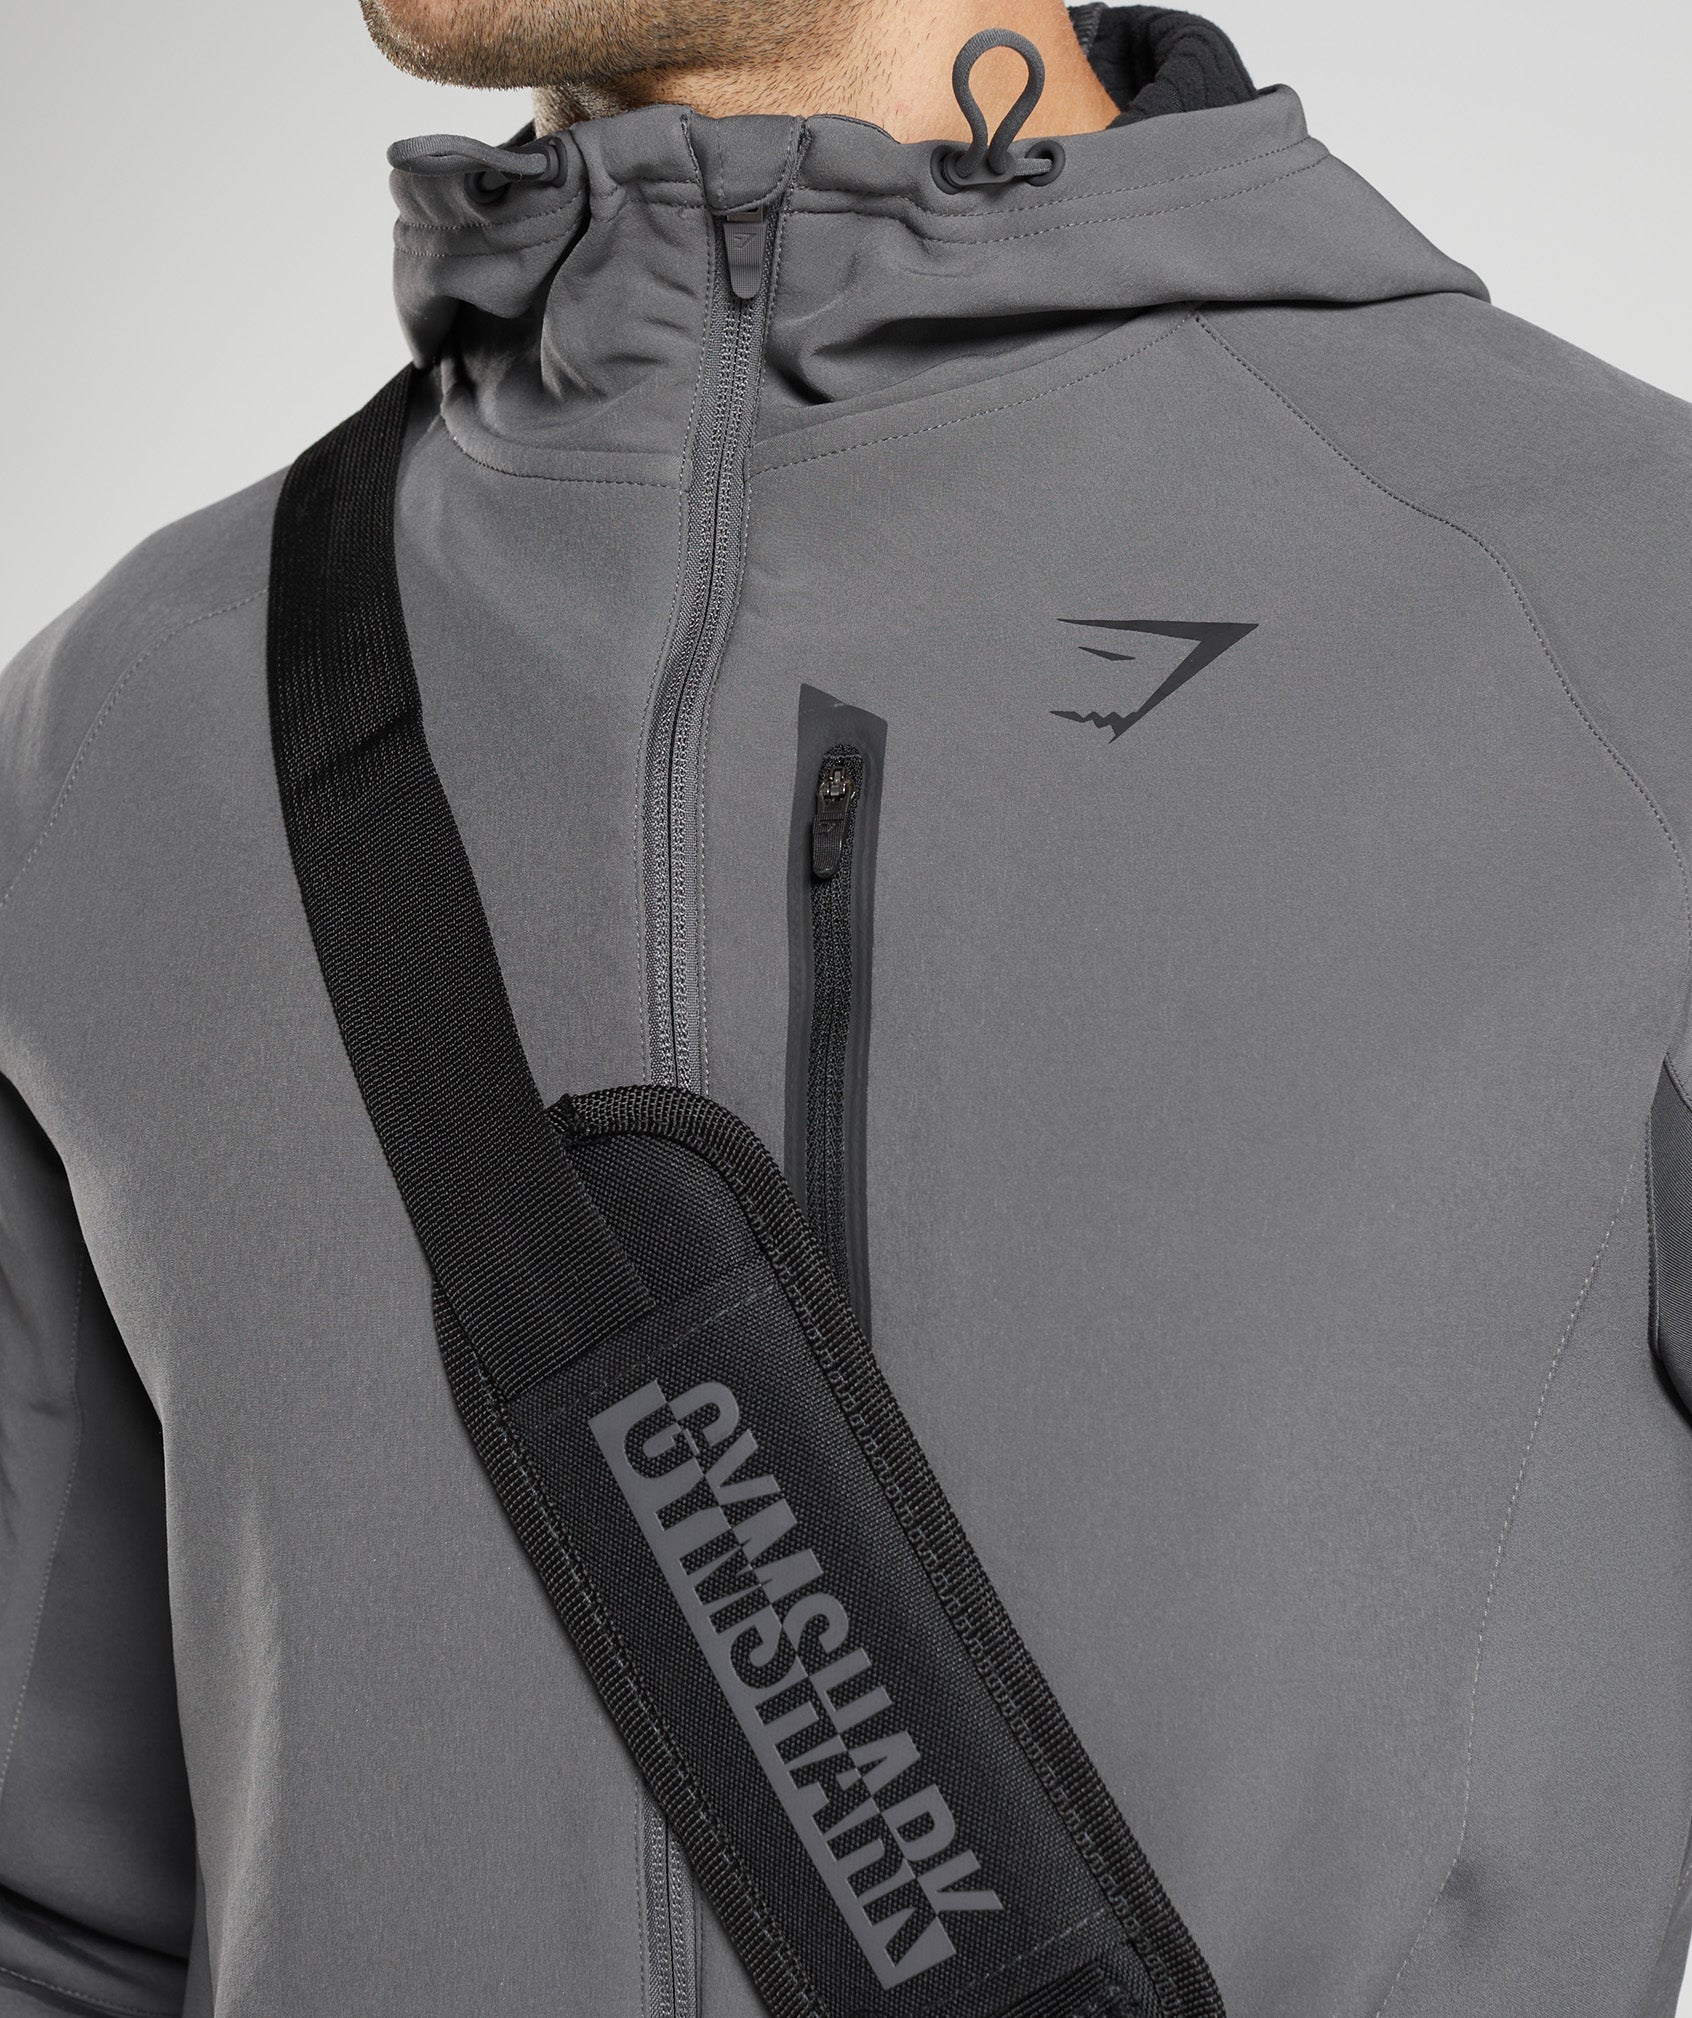 Apex Jacket in Silhouette Grey - view 3